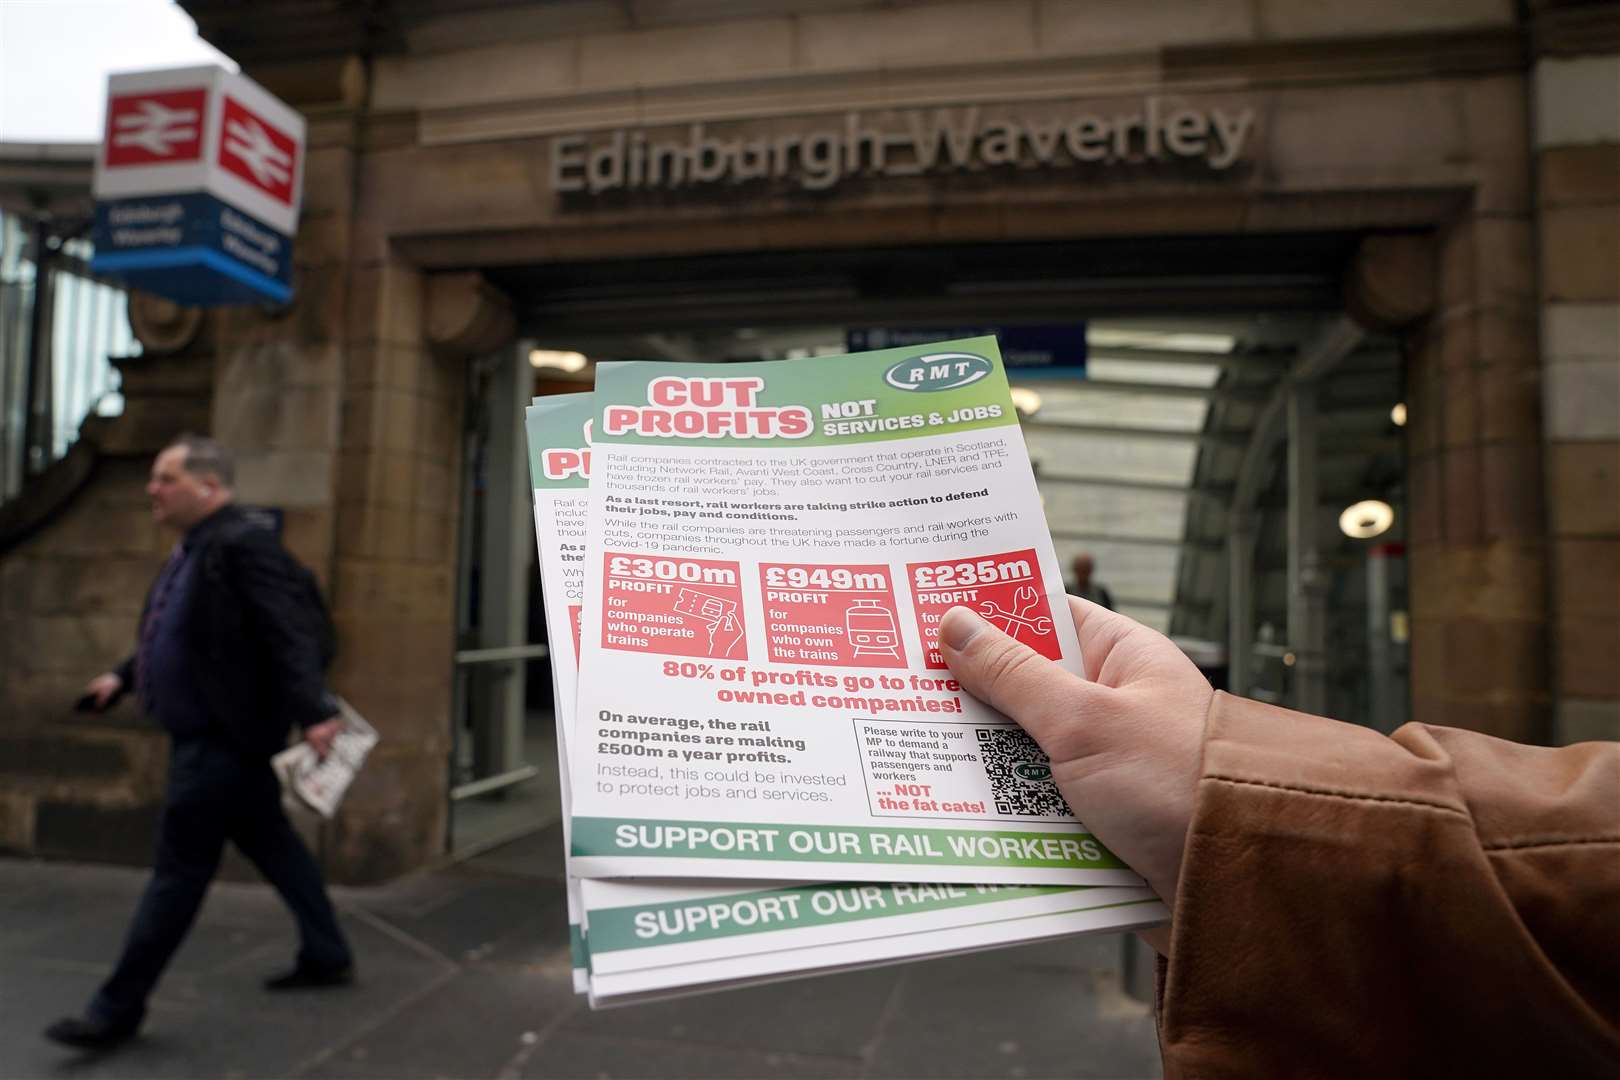 Members of the RMT picket at the entrance to Waverley station in Edinburgh (Andrew Milligan/PA)